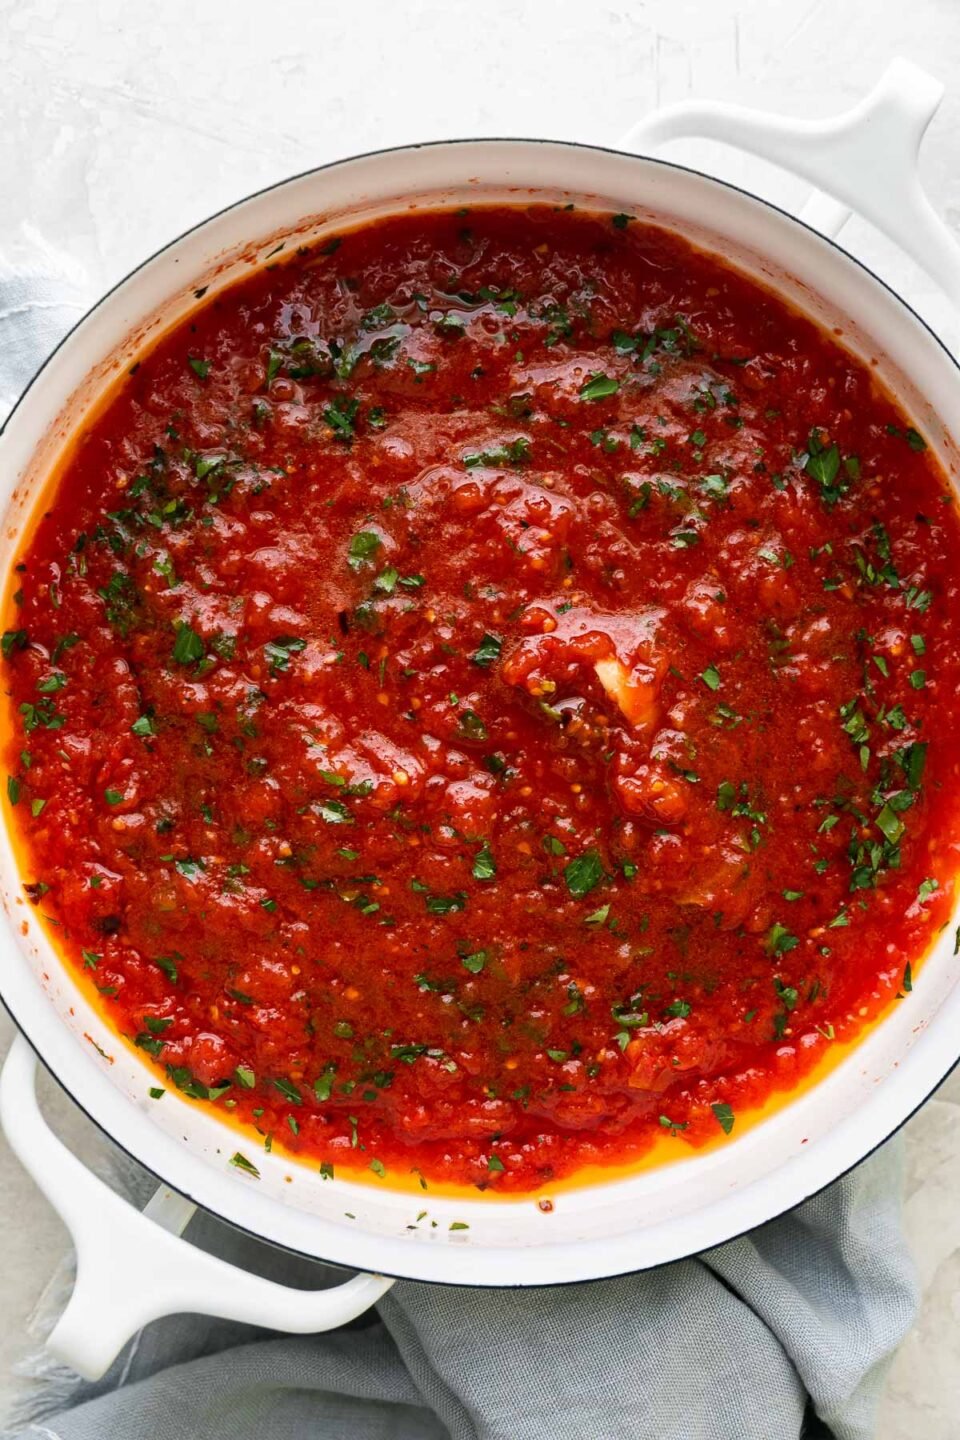 Finished San Marzano tomato sauce fills a large white double-handled skillet. The quick tomato sauce is garnished with chopped basil and the skillet sits atop a creamy white textured surface. A light blue linen napkin rests alongside the skillet.